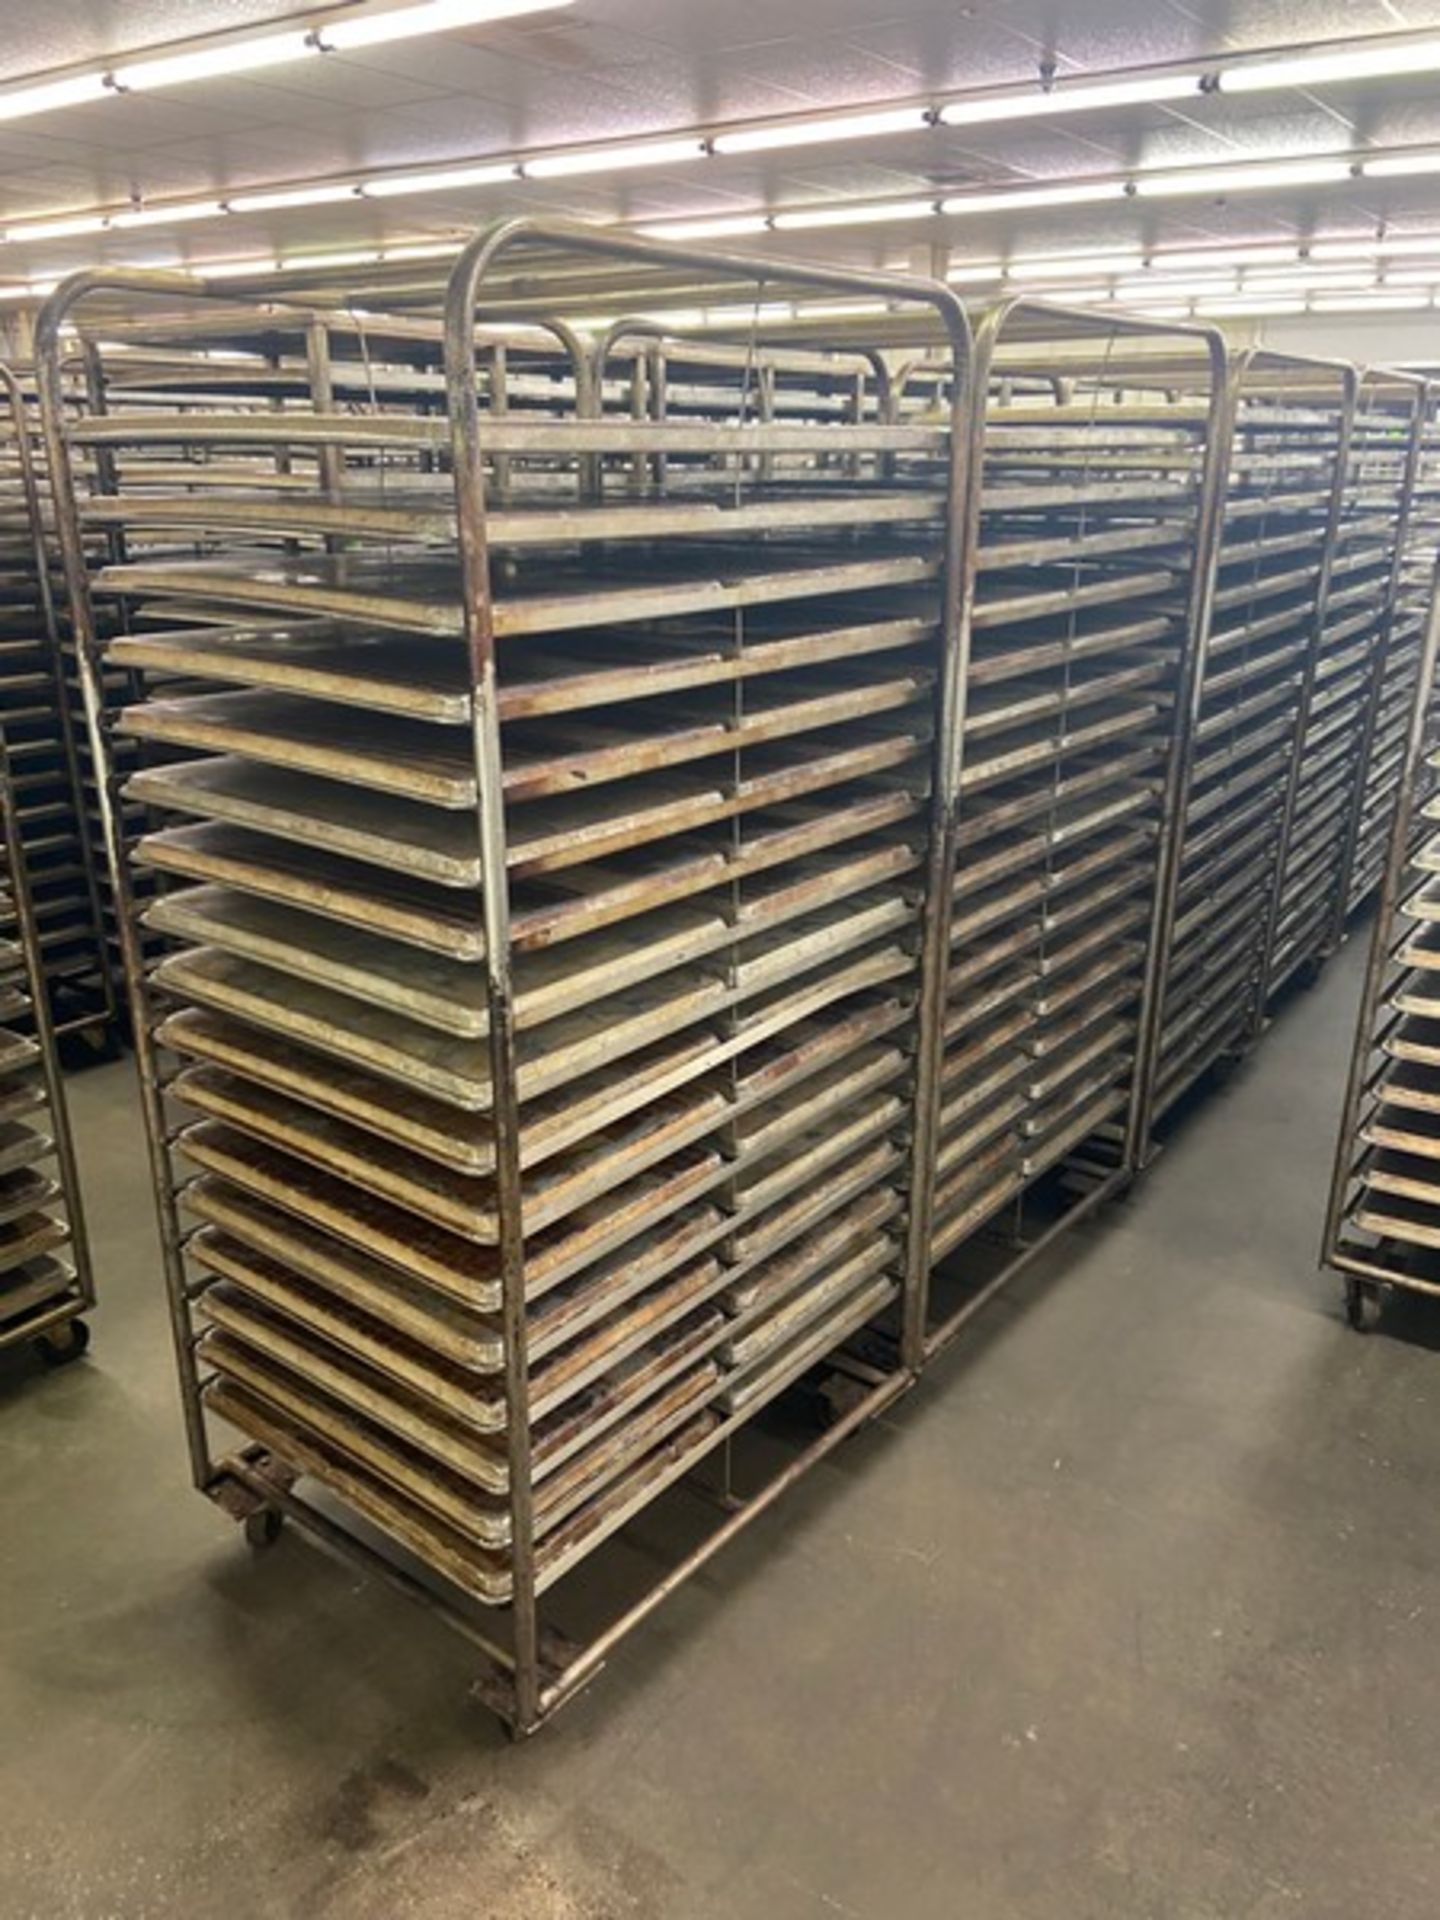 (7) PORTABLE DOUBLE SIDED BAKING PAN RACKS, MOUNTED ON CASTERS (LOCATED IN HERMITAGE, PA) - Image 3 of 3